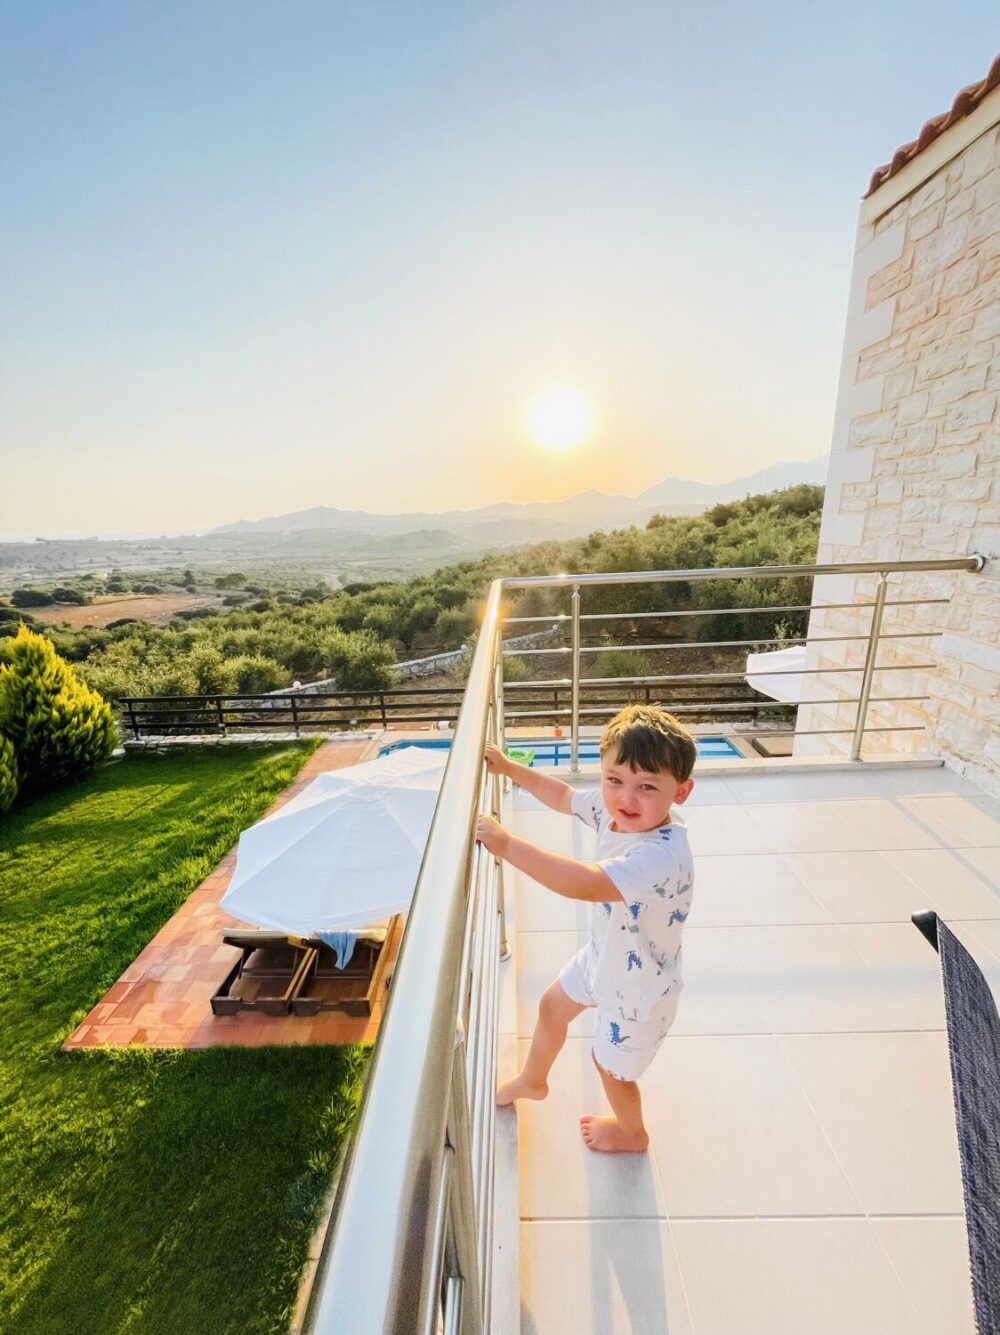 ARE YOU LOOKING FOR A FAMILY FRIENDLY POOL VILLA IN CRETE?